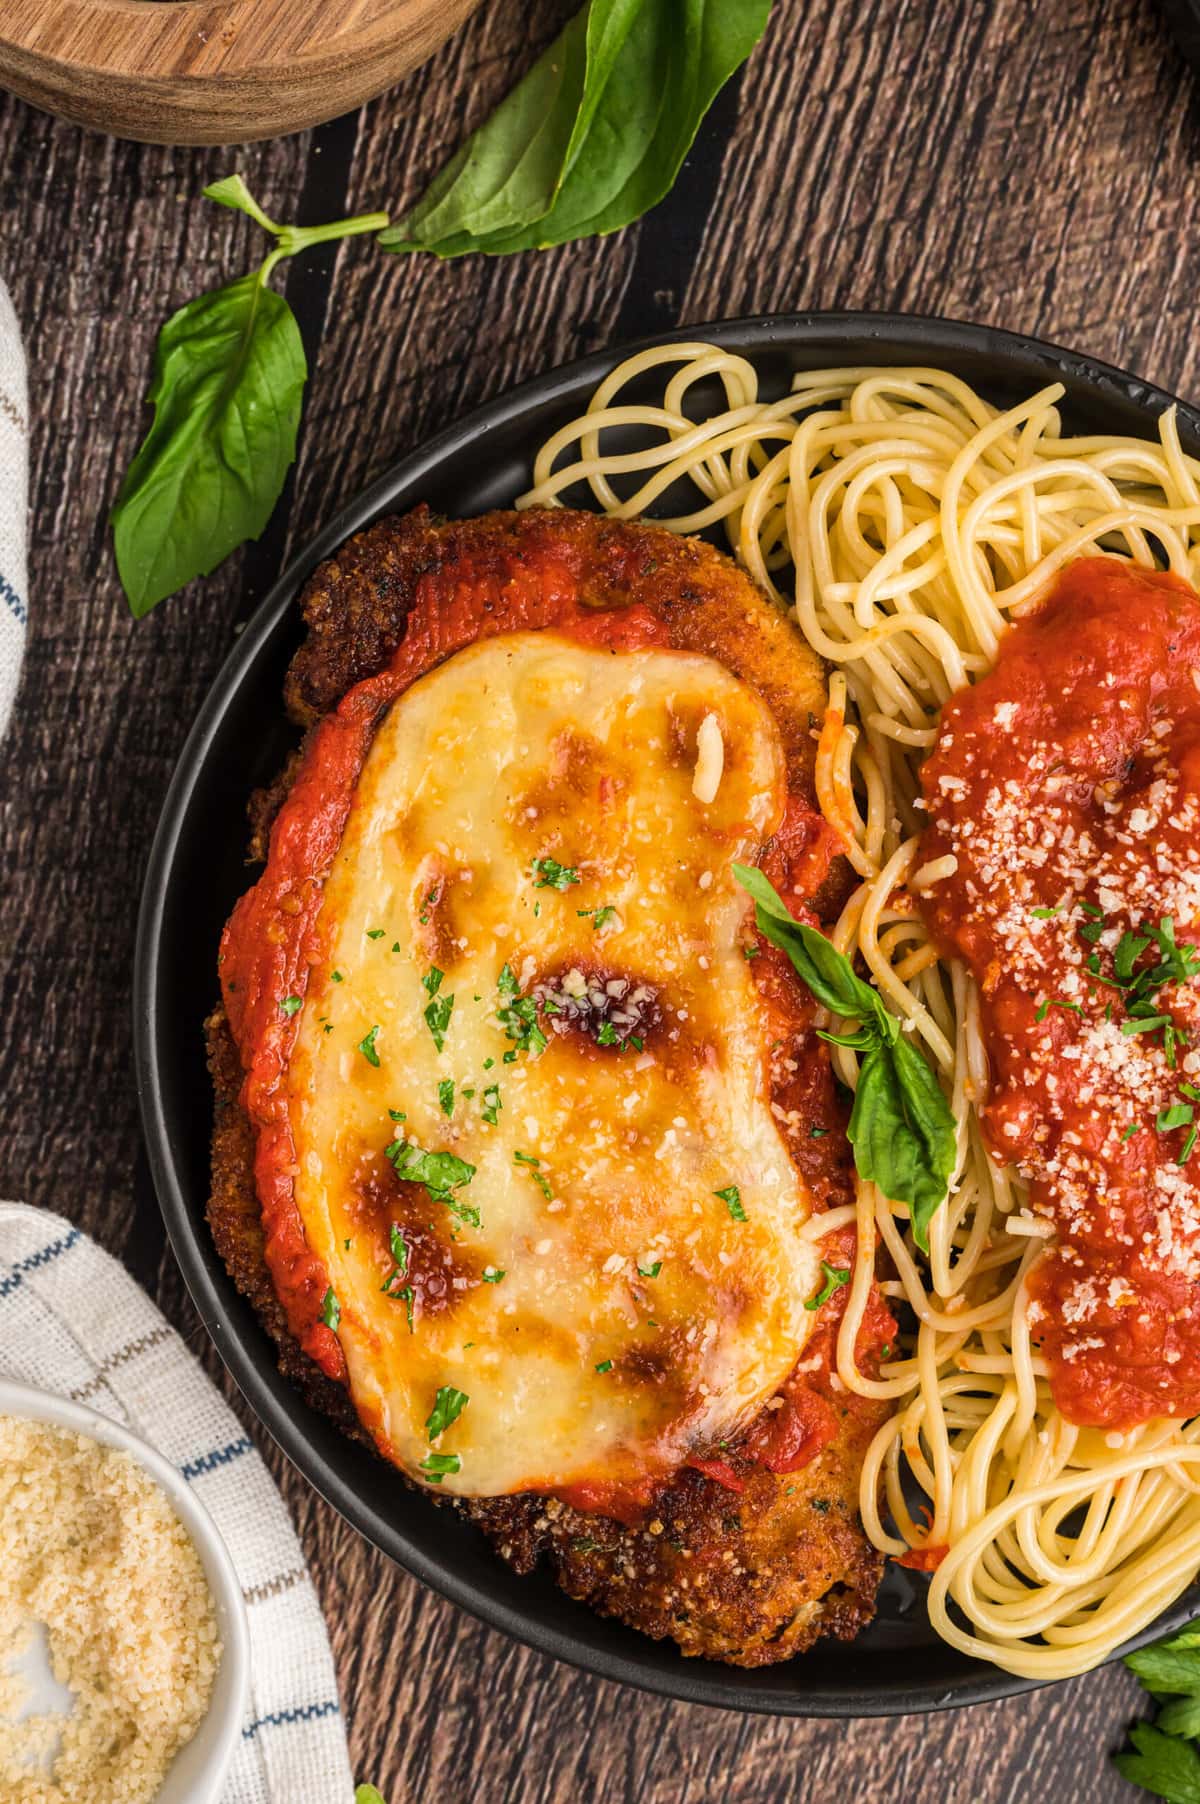 Overhead view of chicken parmesan and spaghetti